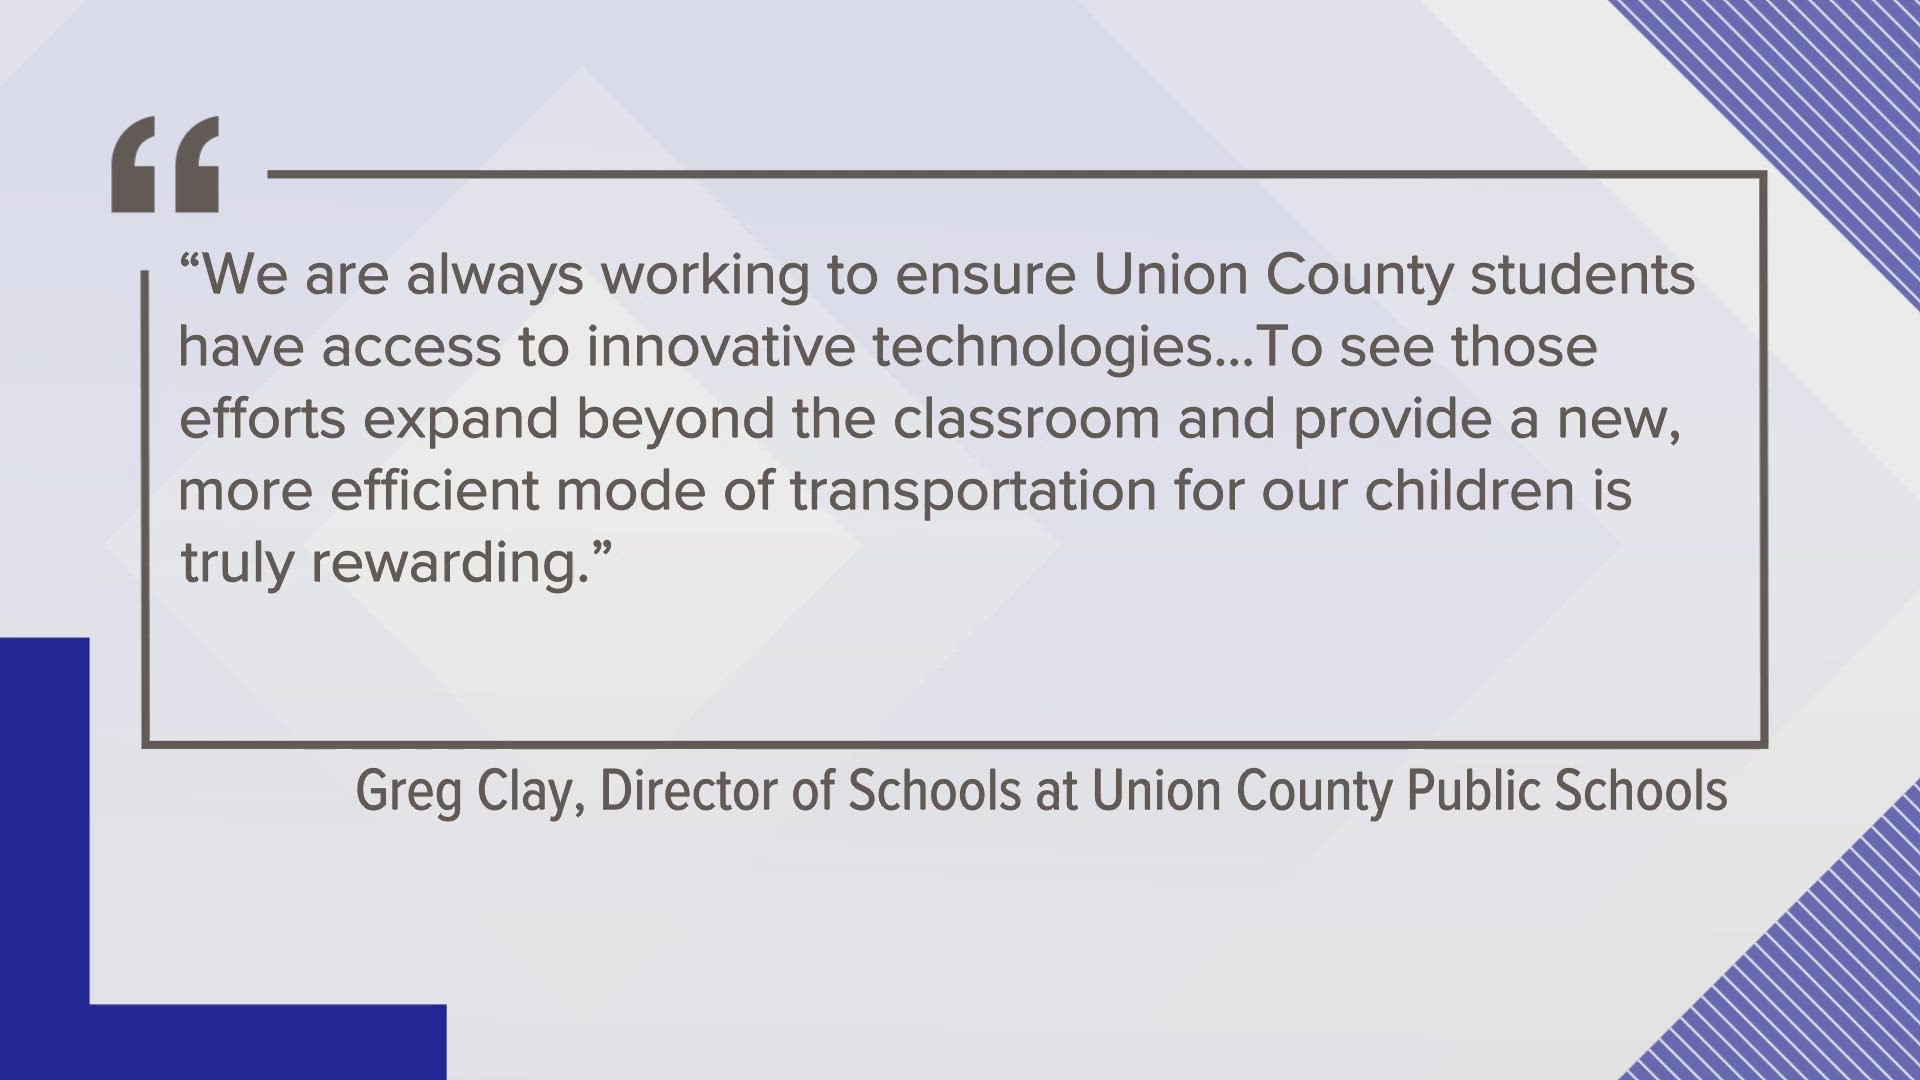 UCPS was one of the only ten Tennessee school systems that was awarded an EPA Clean School Bus Rebate, KUB said.